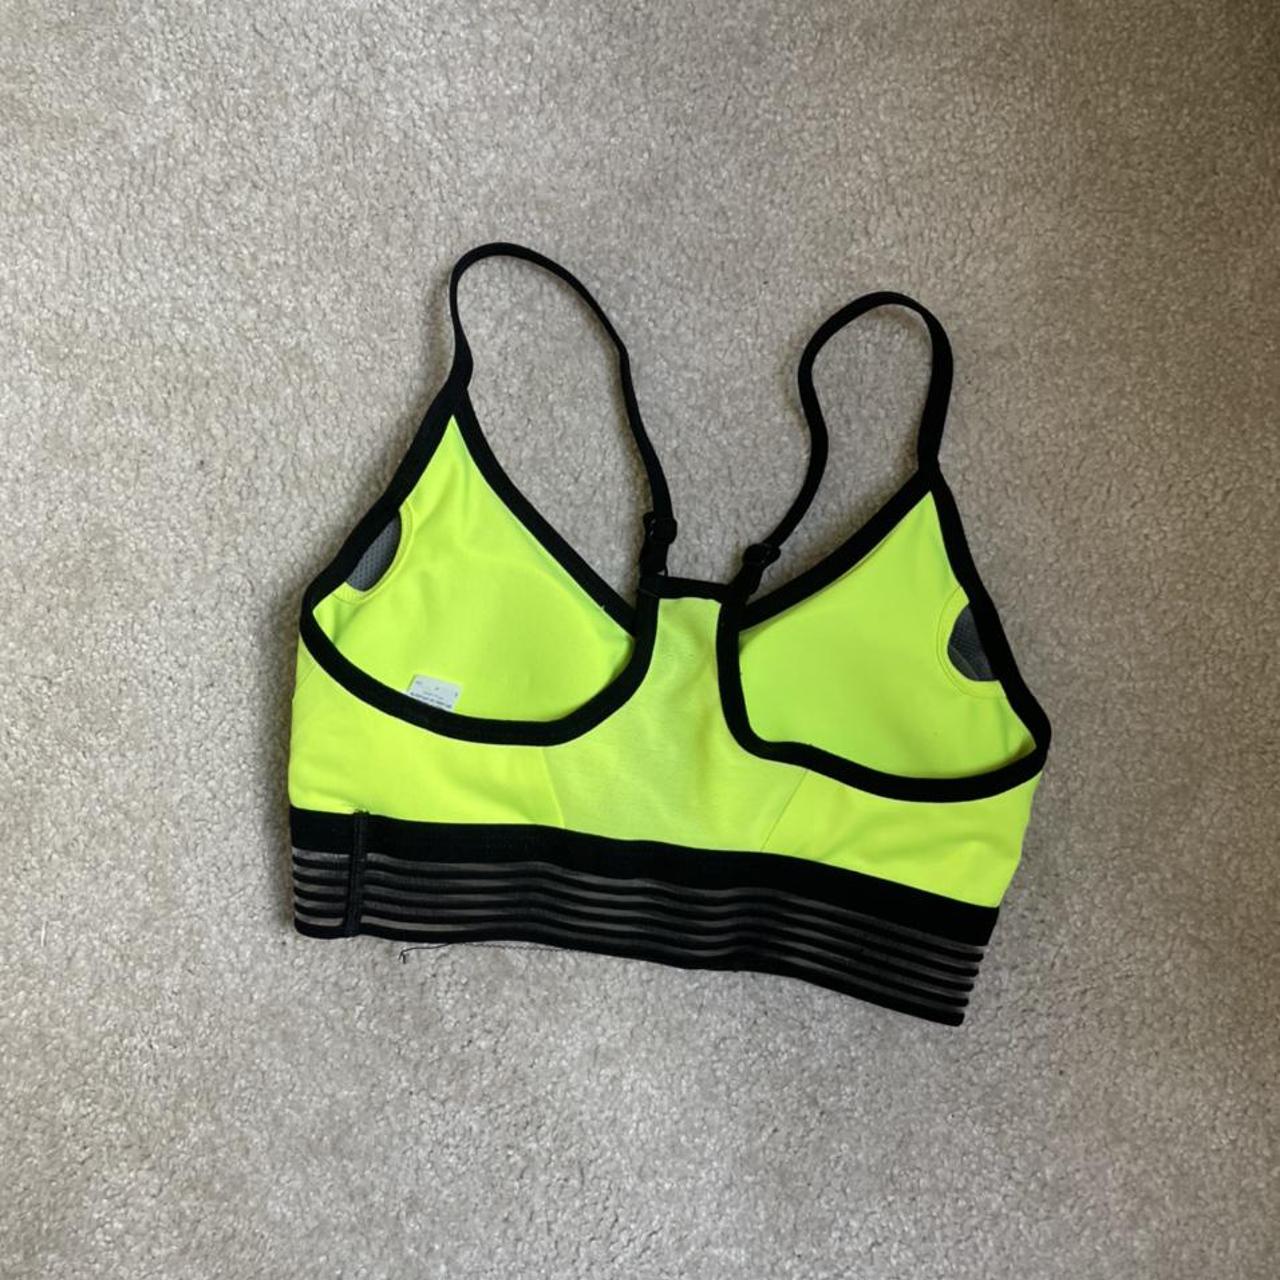 Product Image 2 - Nike sports bra. Too small